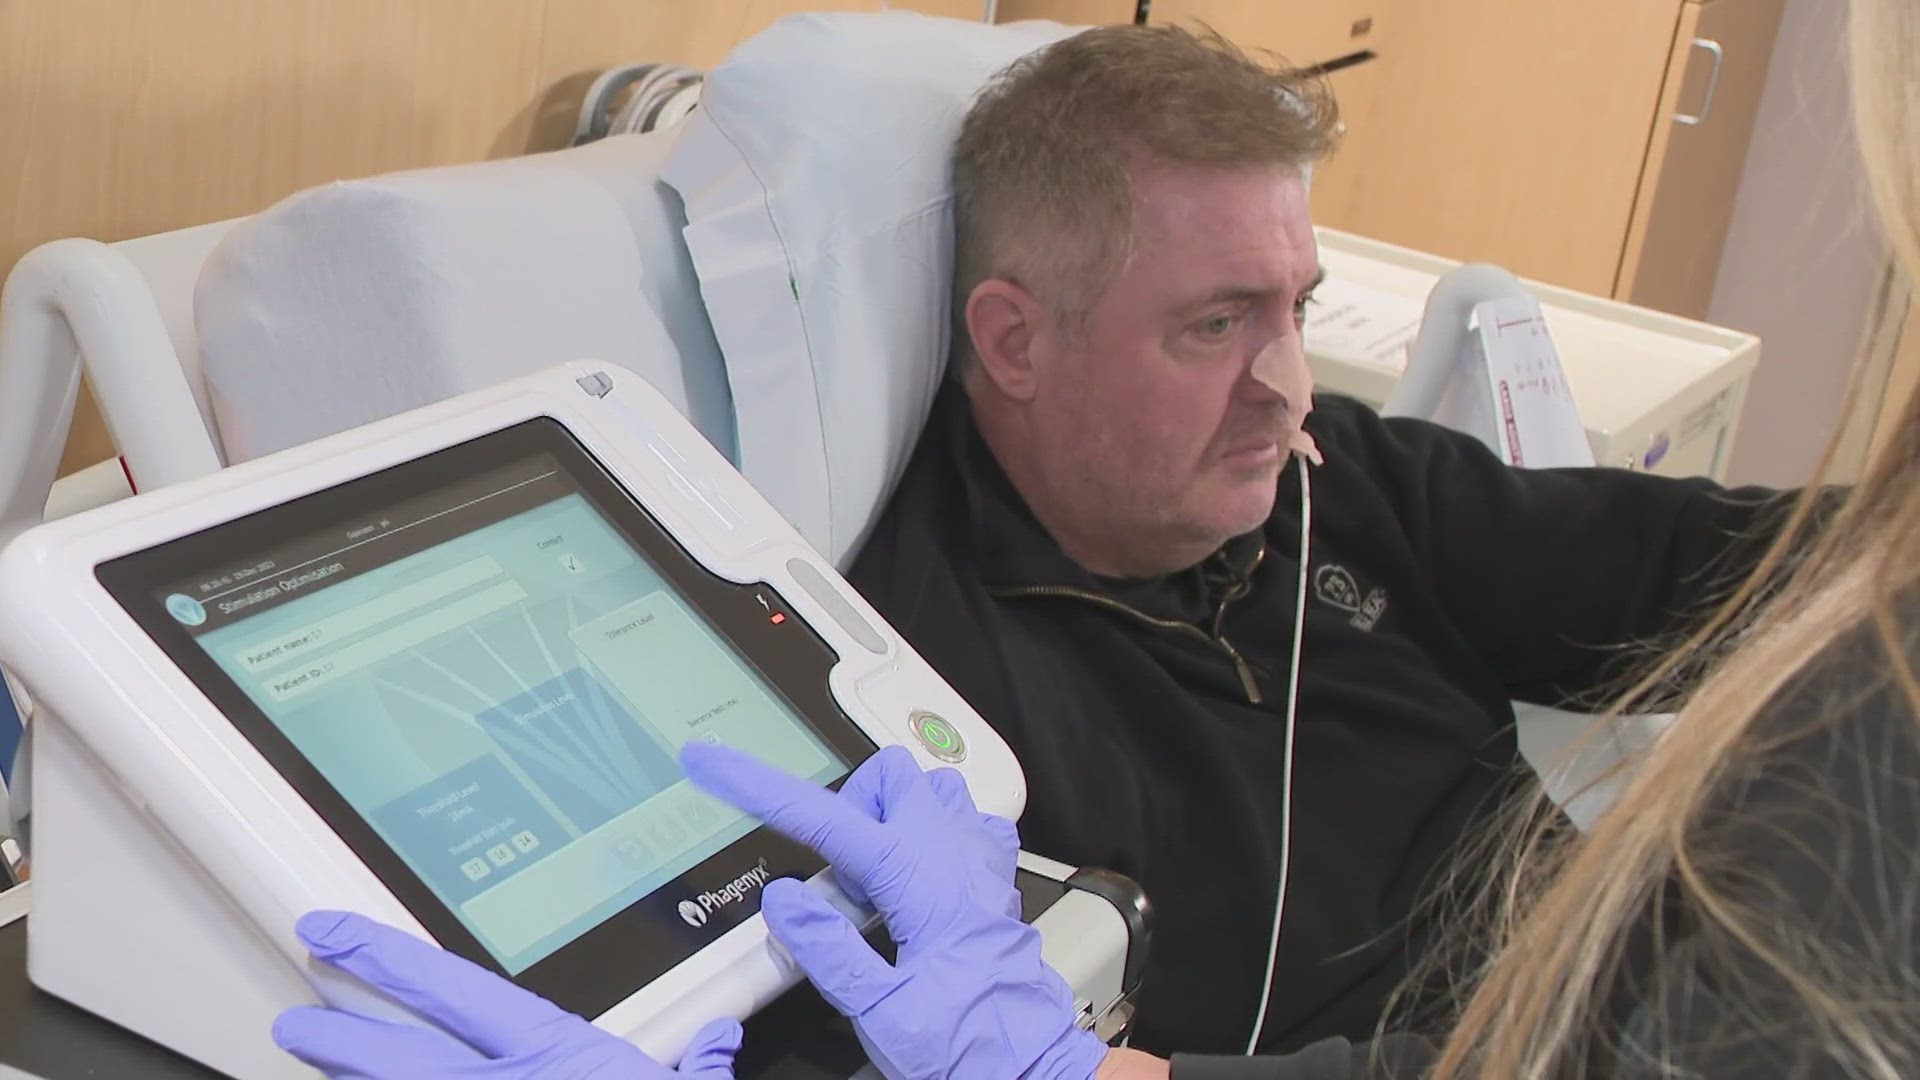 The life-changing treatment aims to deliver electric currents to help those who have trouble swallowing.